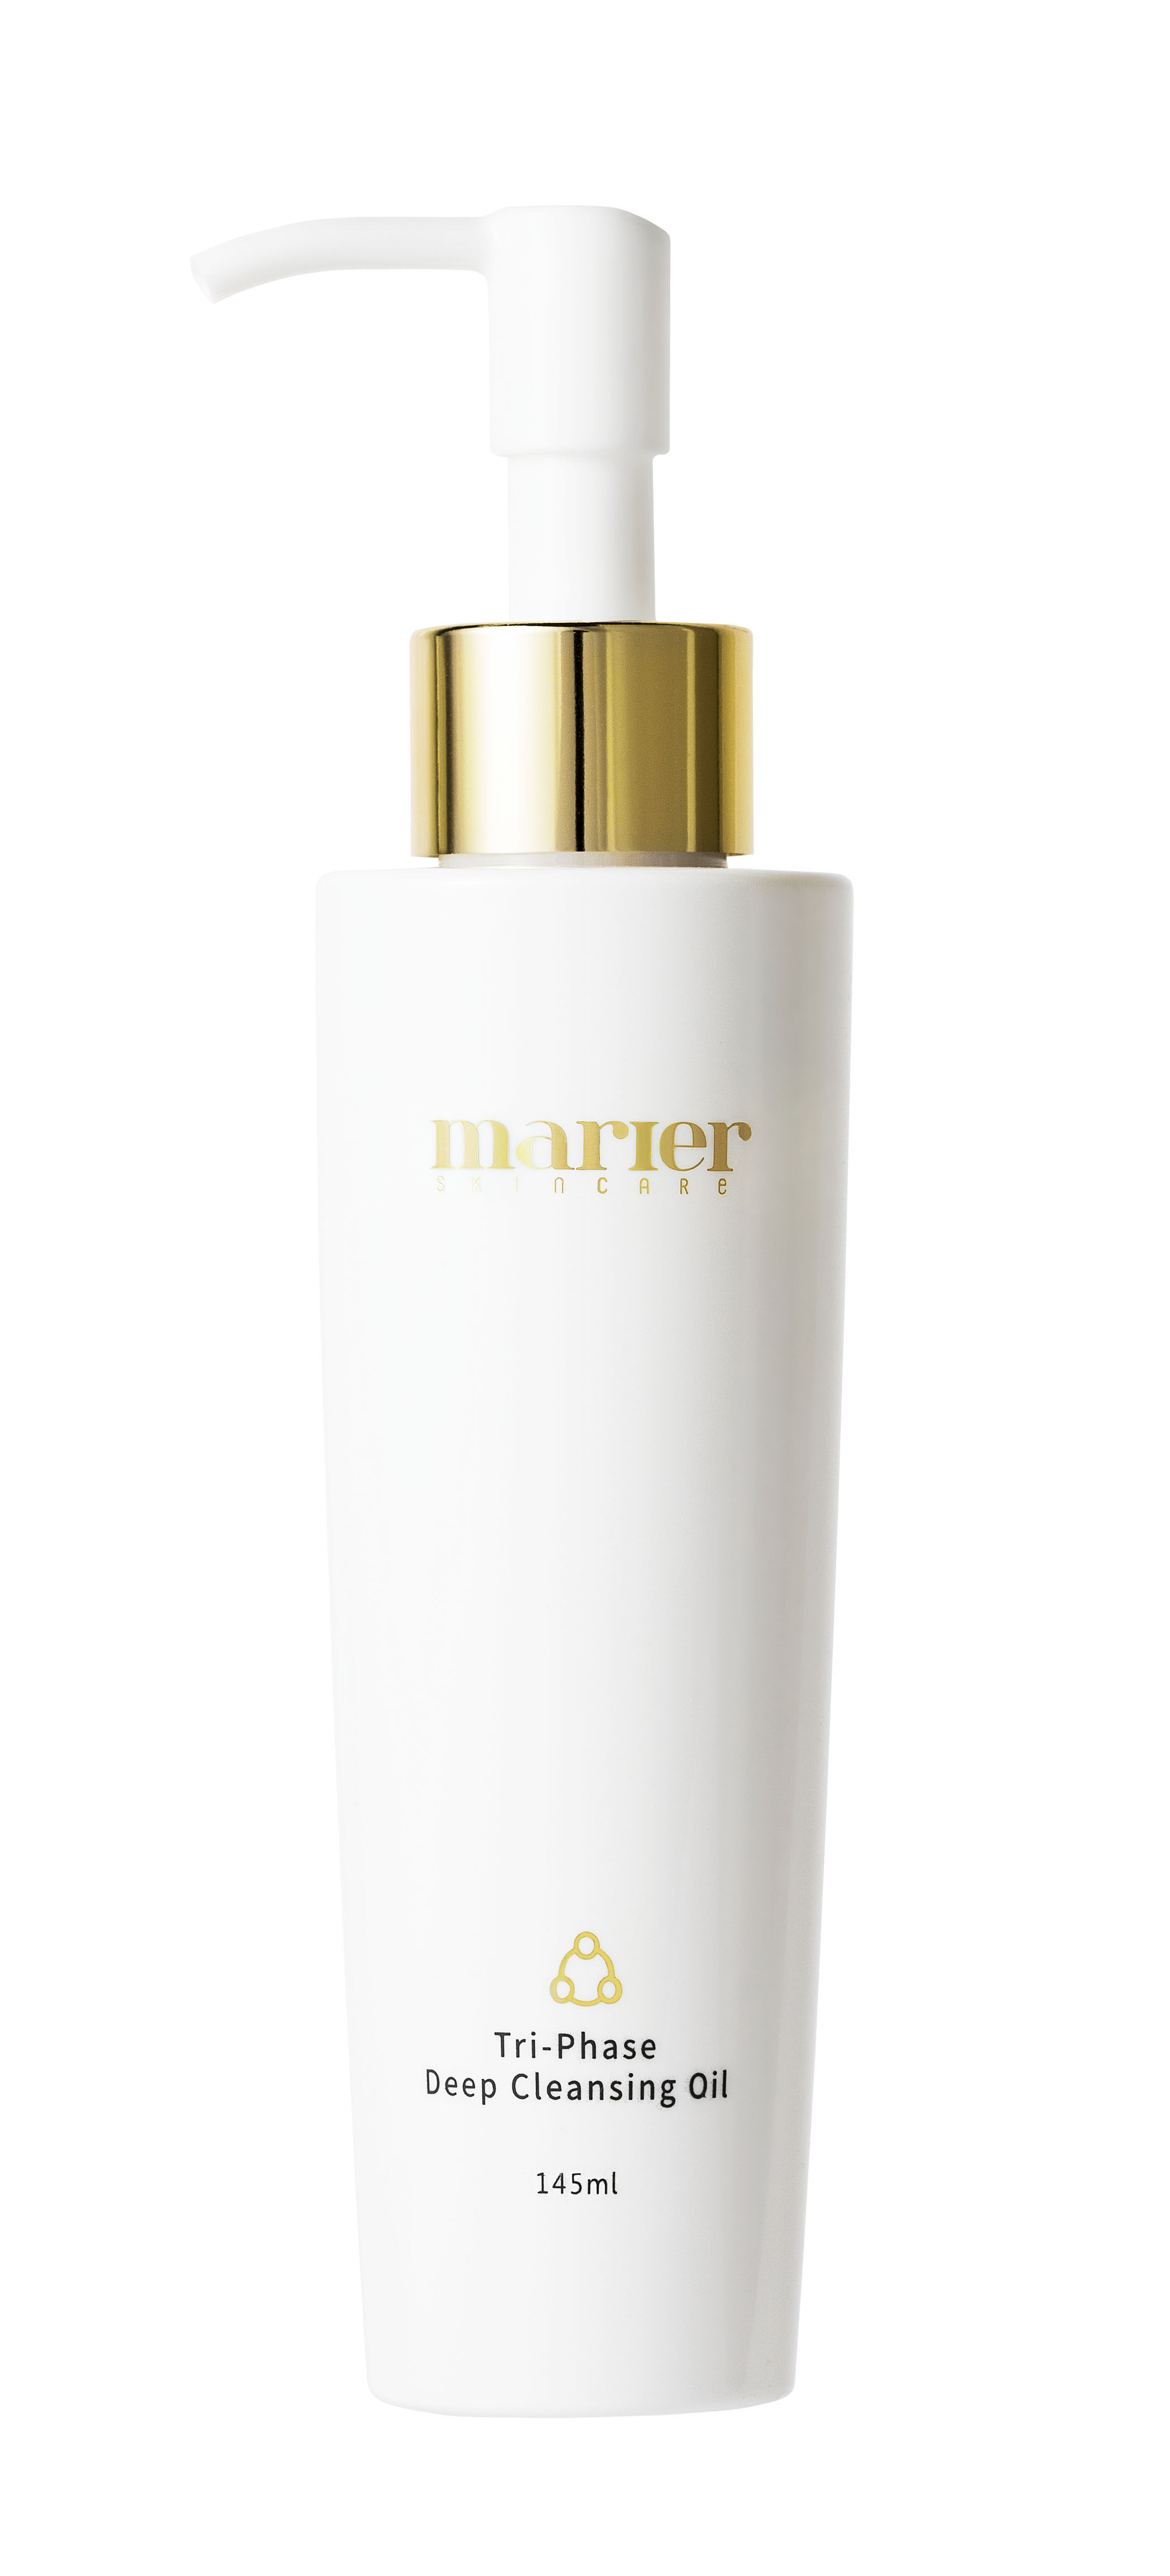 Marier Skincare Tri-Phase Deep Cleansing Oil $38